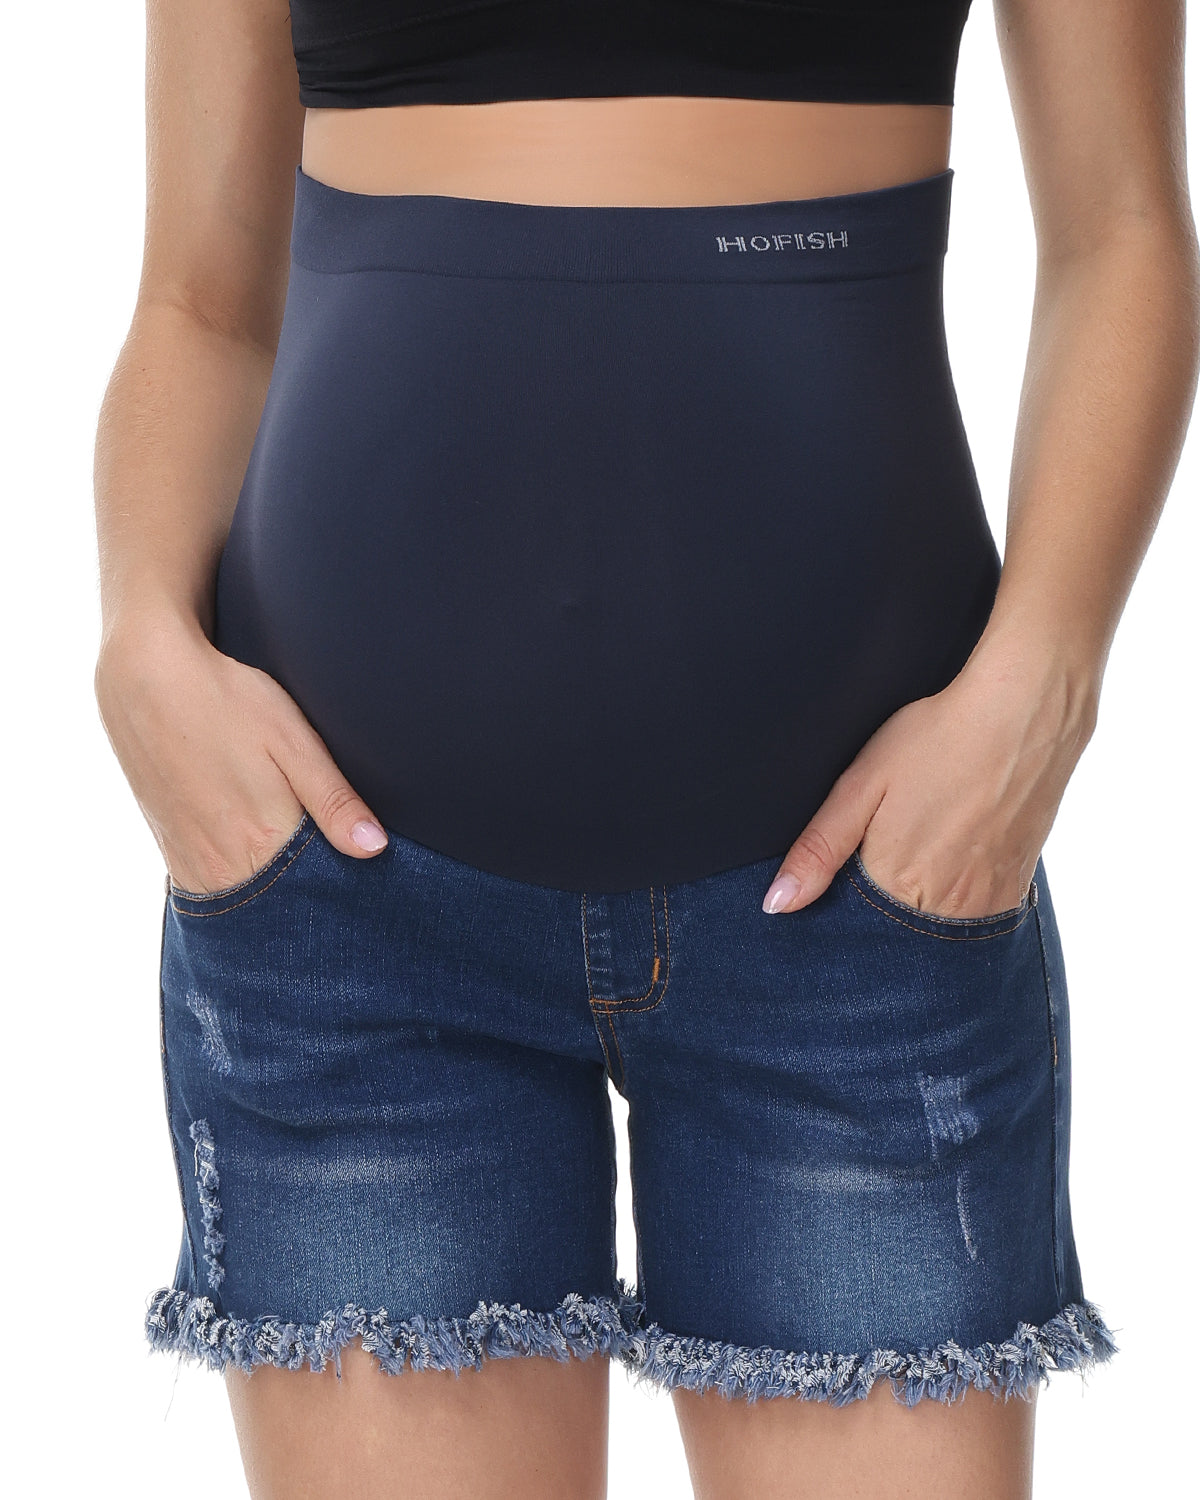 Over The Belly Pregnancy Support Maternity Shorts Dark Blue